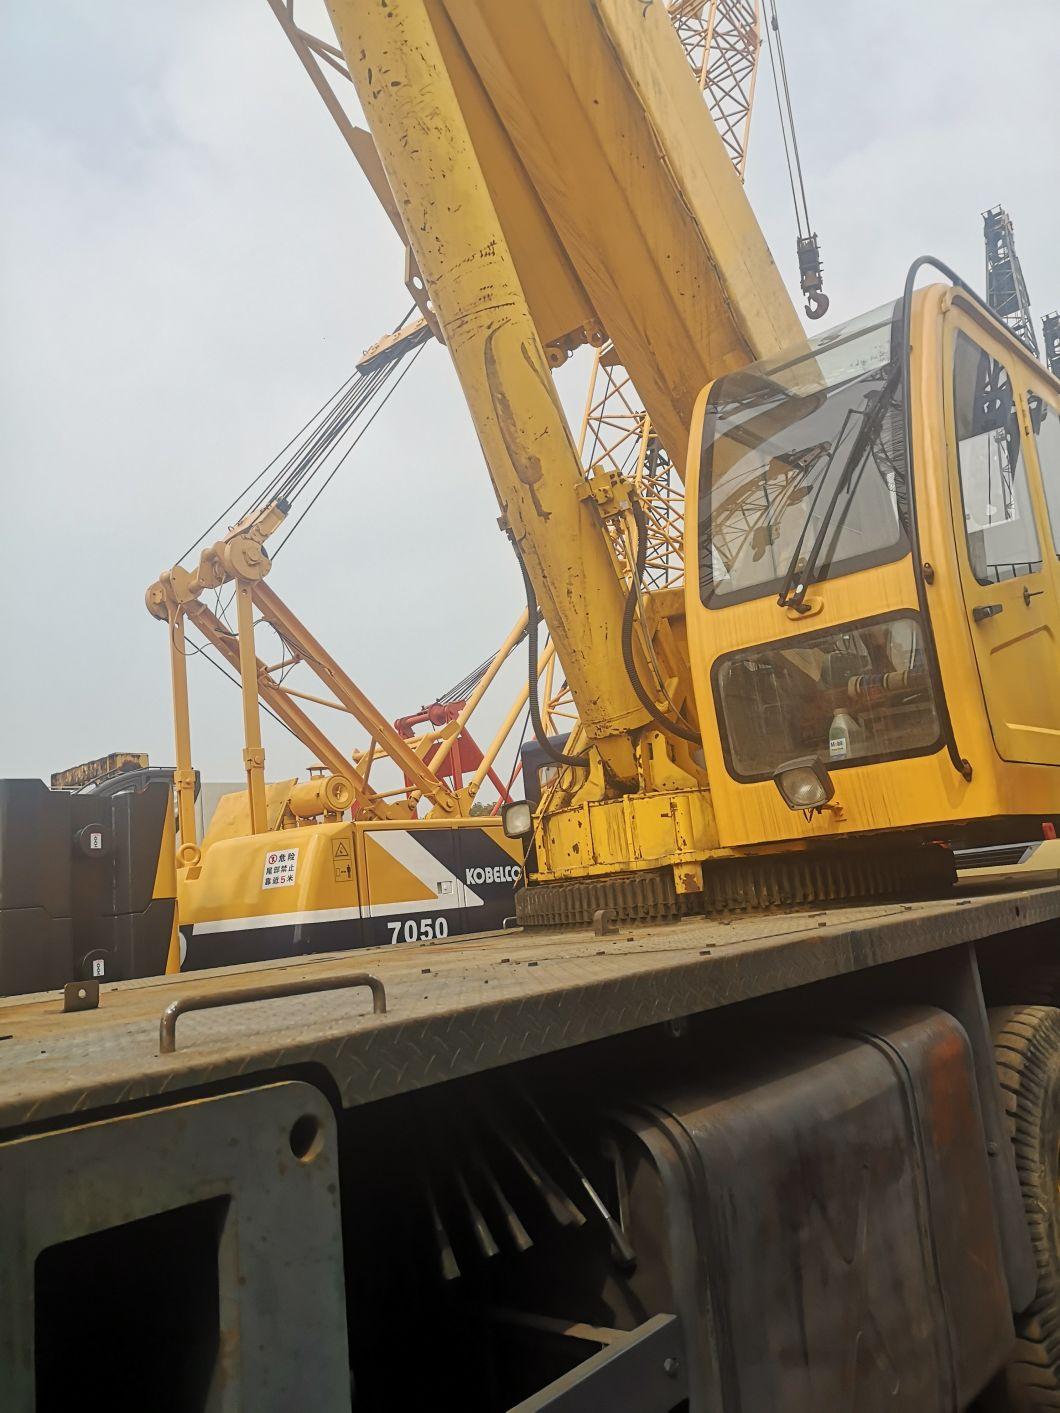 Used Truck Crane 50 Ton Qy50K for Sale Made in China